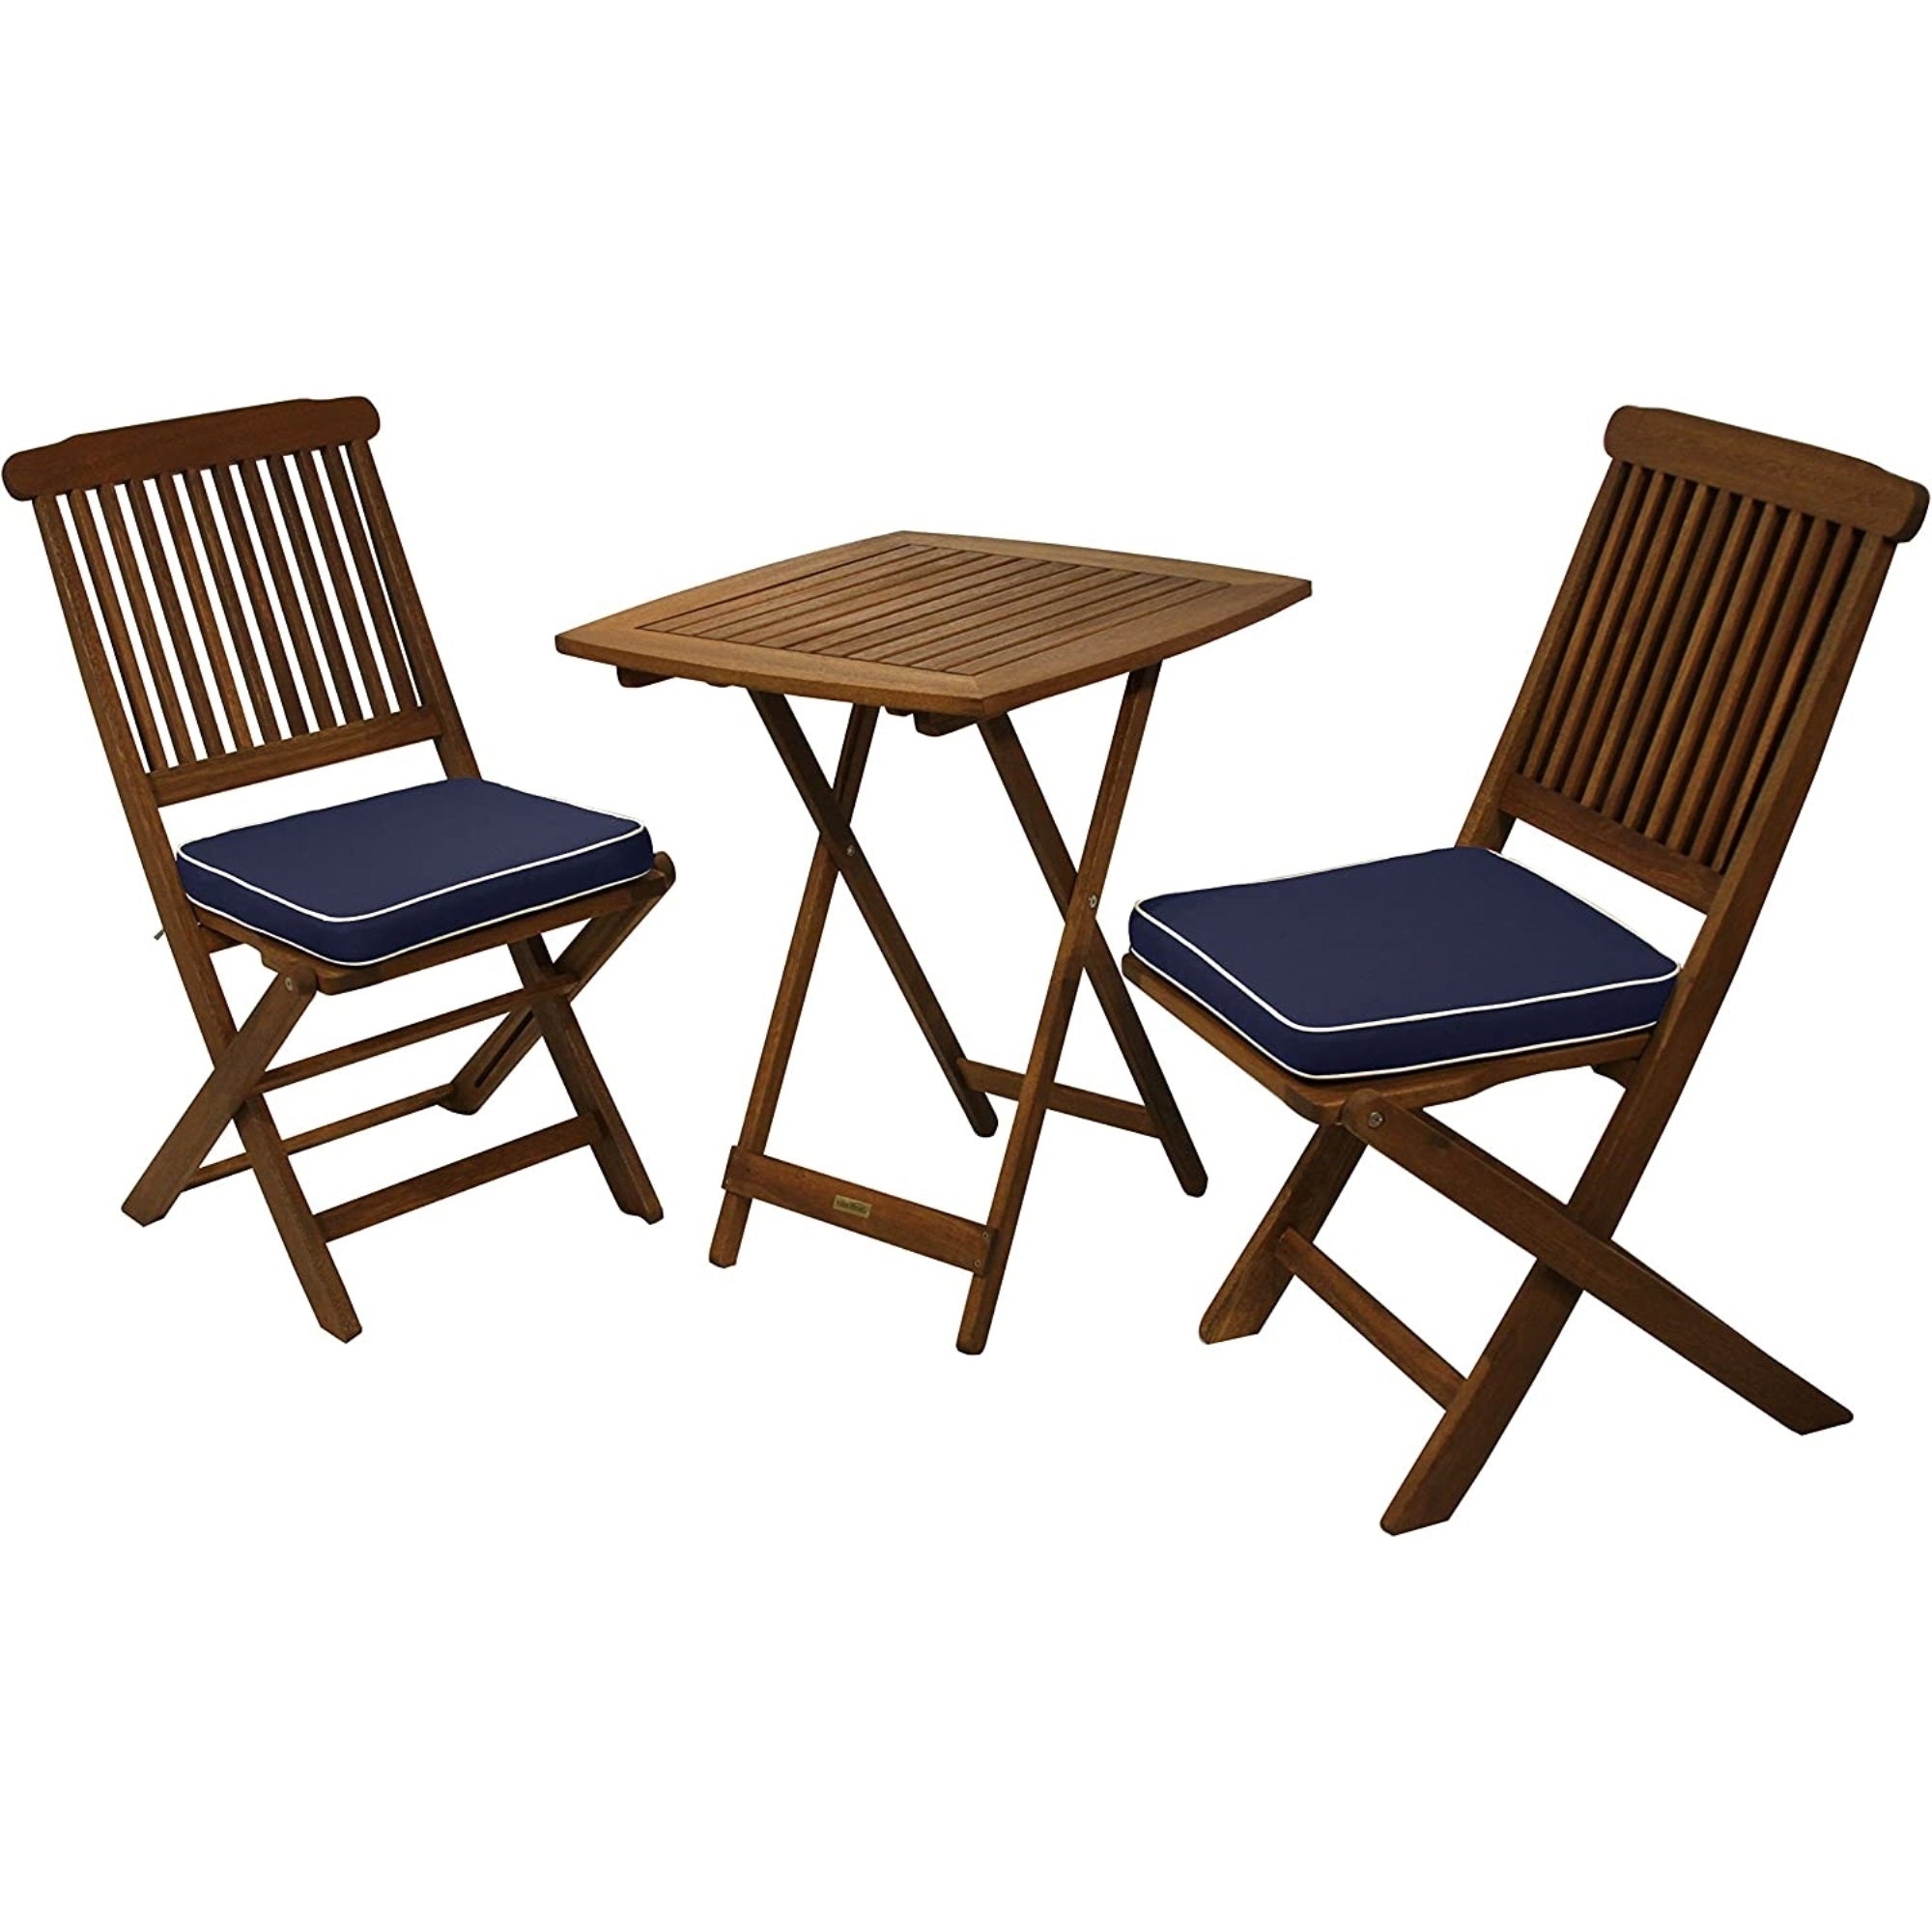 Outdoor Interiors Eucalyptus Wood 3-Piece Square Foldable Bistro Outdoor Furniture Patio Set, Table and 2 Chairs with Cushions